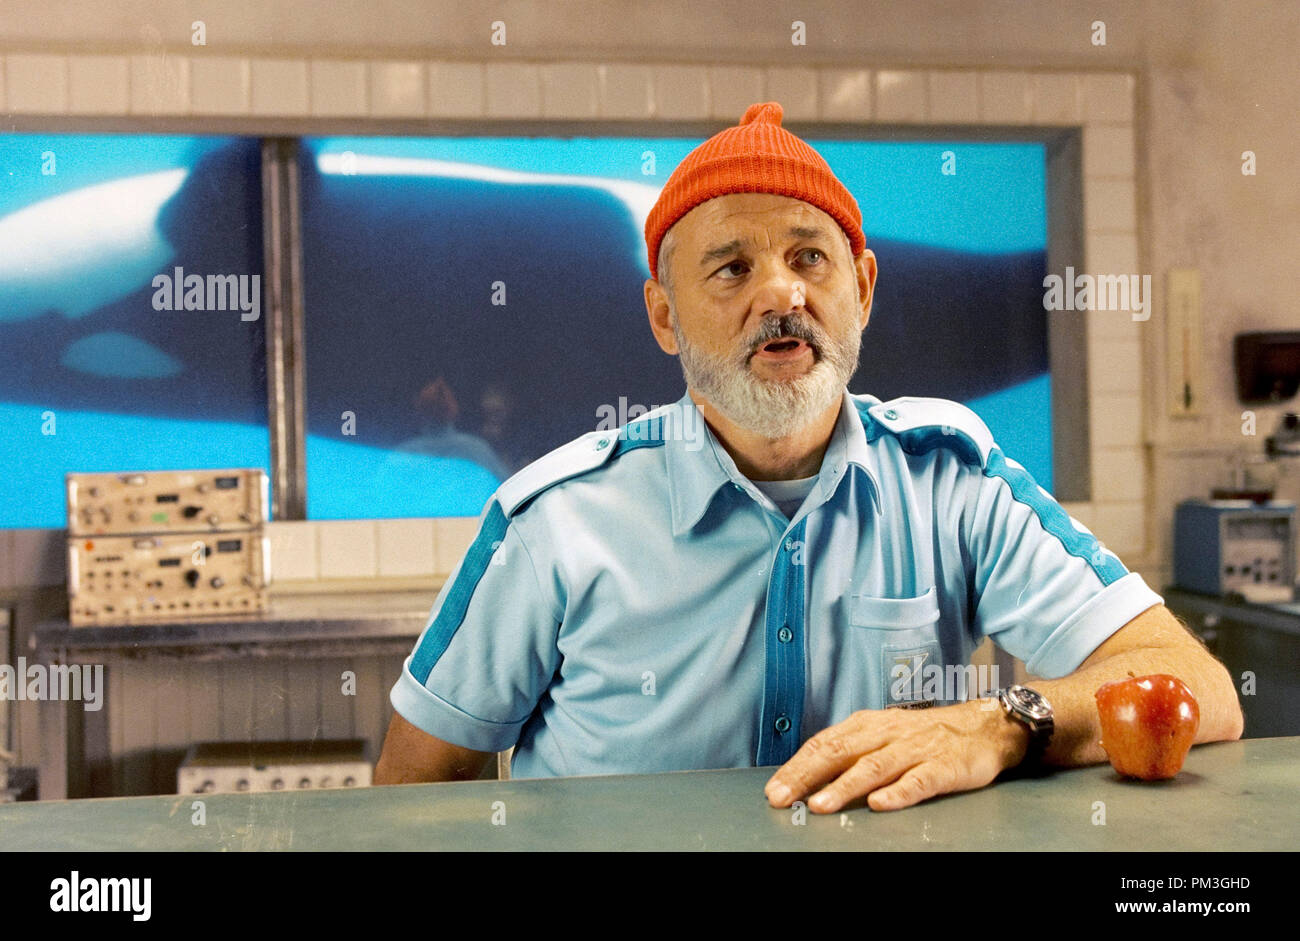 Film Still from 'The Life Aquatic with Steve Zissou' Bill Murray © 2004 Touchstone Pictures File Reference # 307351152THA  For Editorial Use Only -  All Rights Reserved Stock Photo